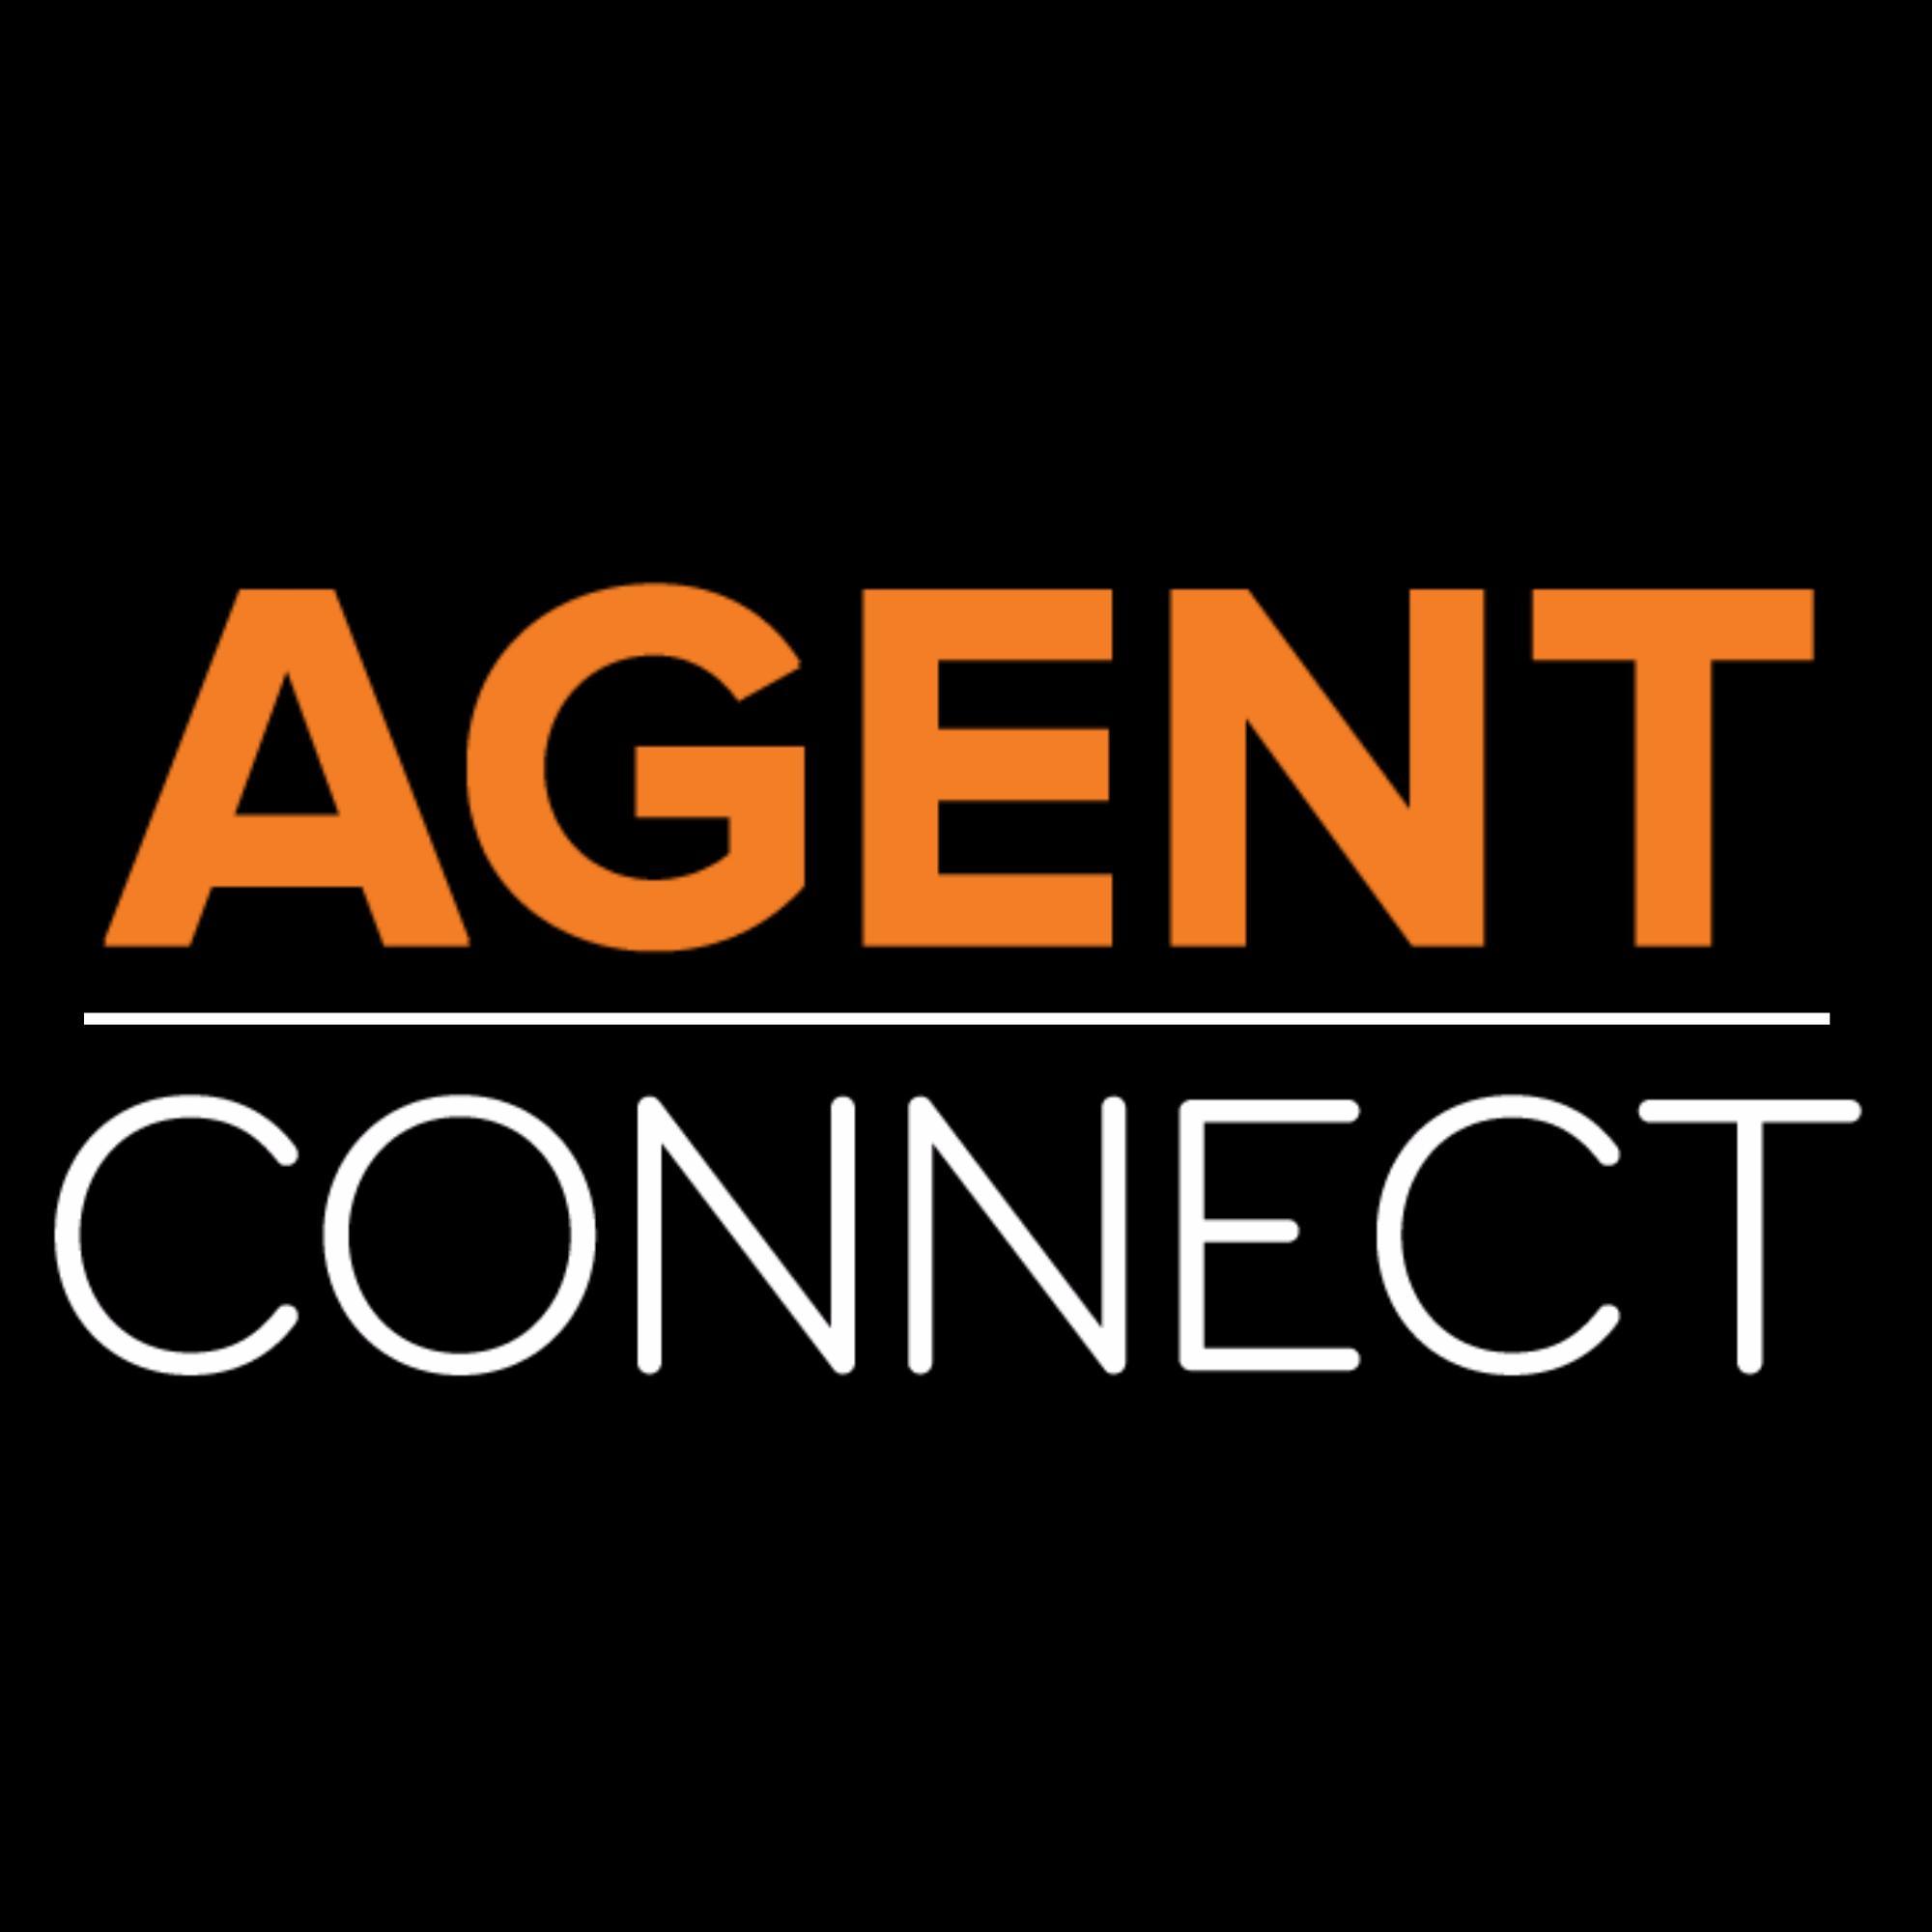 The Leading Tech Event for the Modern Agent. Join us in New York in January 2016.